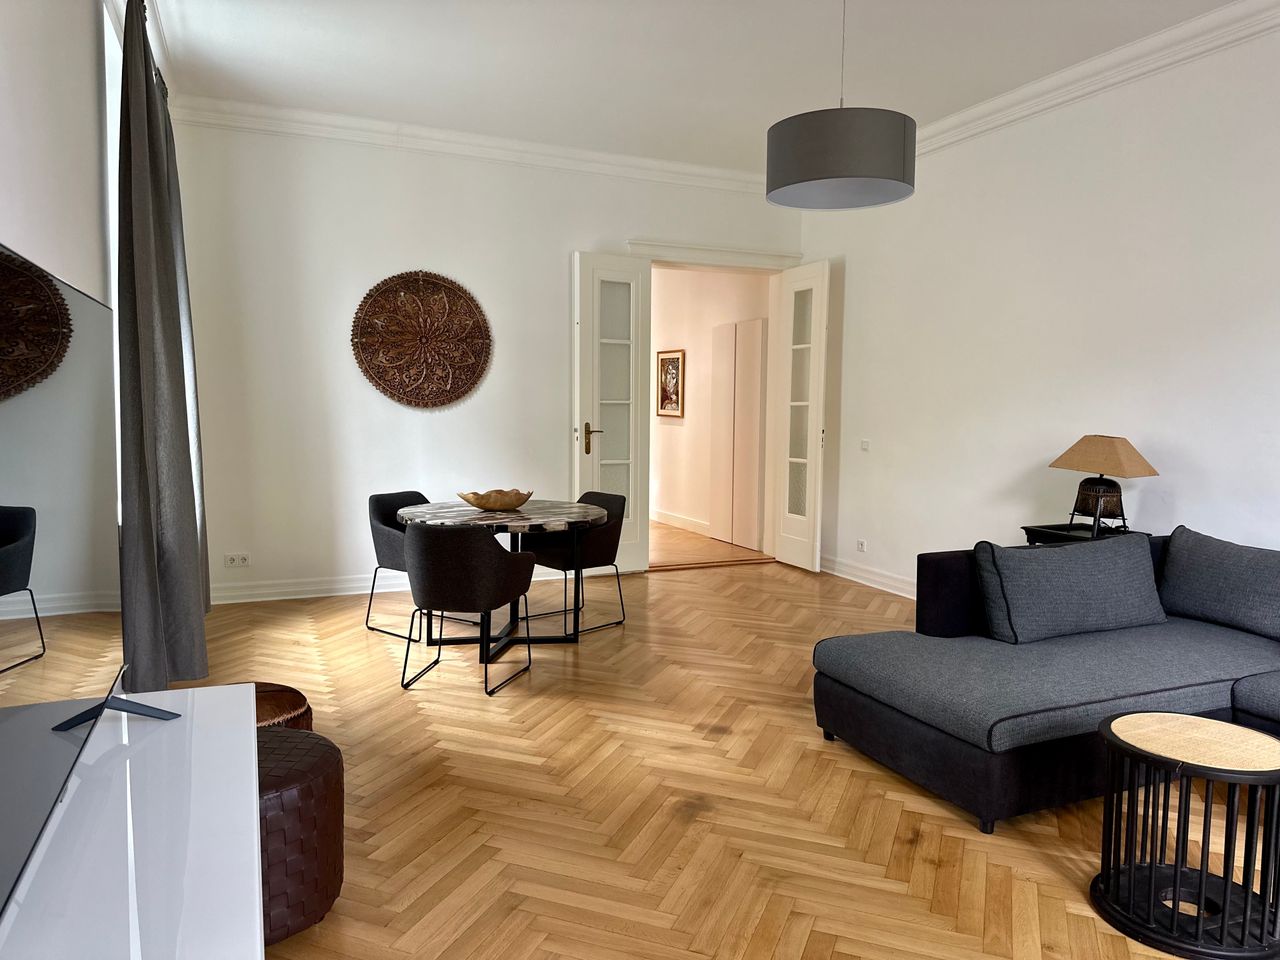 EXCLUSIVE LOCATION - IN THE CENTER OF CITY WEST WITH THE BEST CONNECTIONS